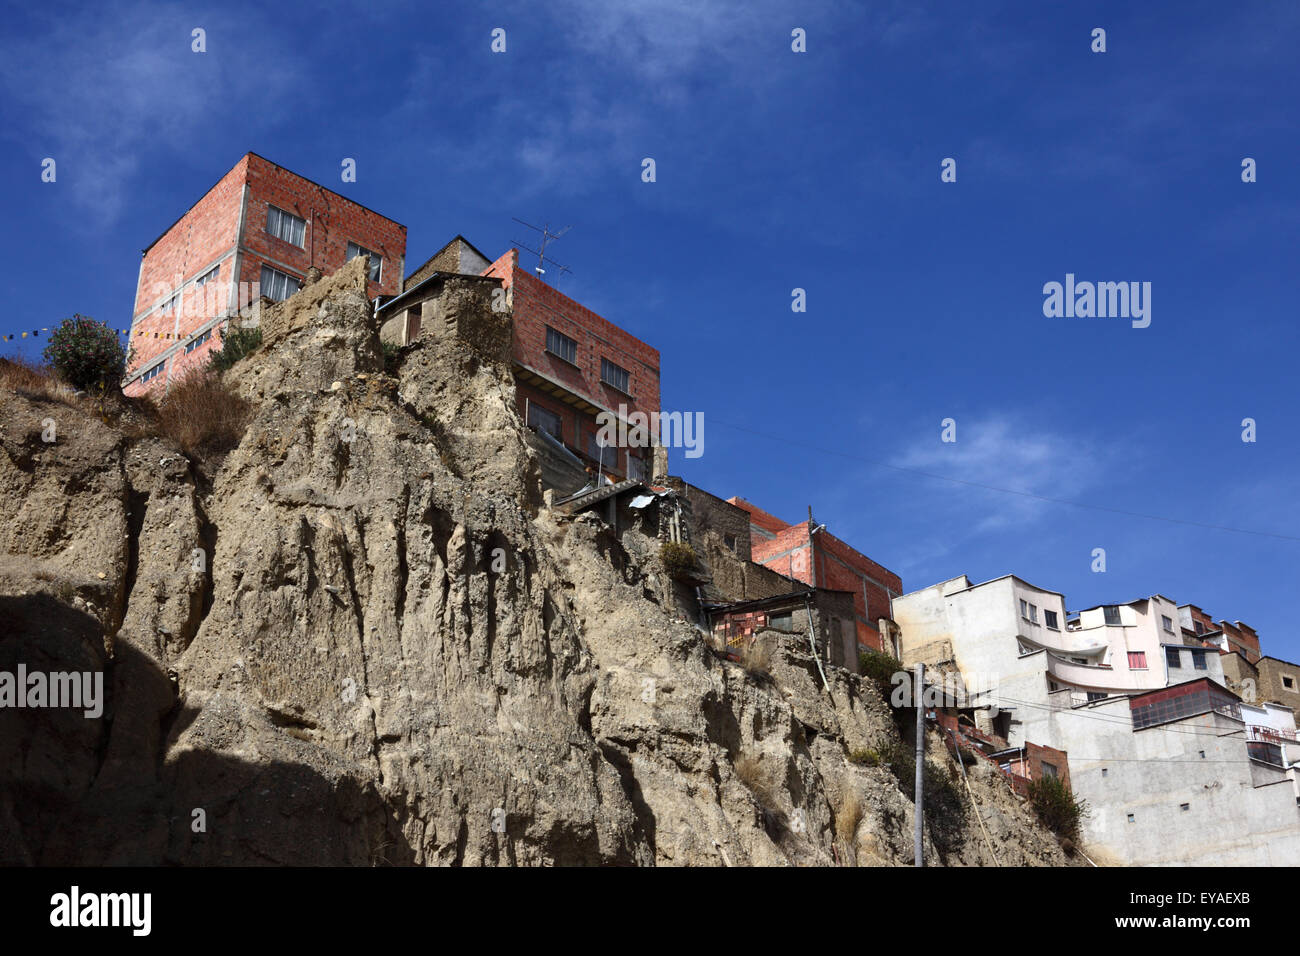 Precariously built houses (probably without any sort of authorisation) on an unstable steep earth / soil hillside on Calle Belzu, La Paz, Bolivia Stock Photo